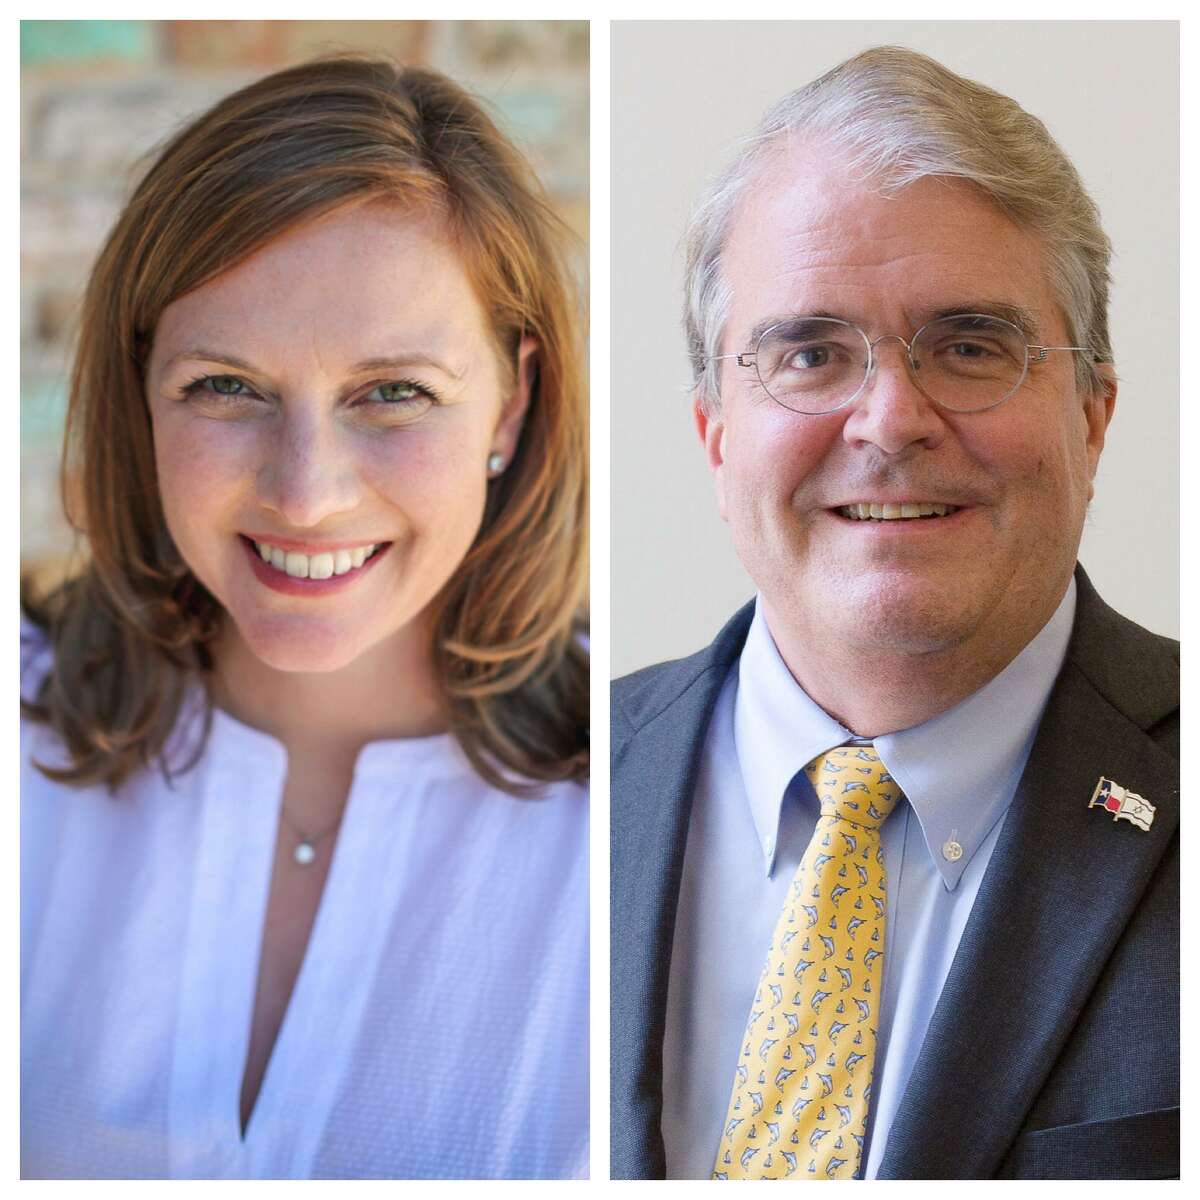 Democrat Lizzie Pannill Fletcher and Republican John Culberson are running for U.S. Congress in Houston’s Congressional District 7. >>>See who's raking in the most PAC money in US campaigns so far ...